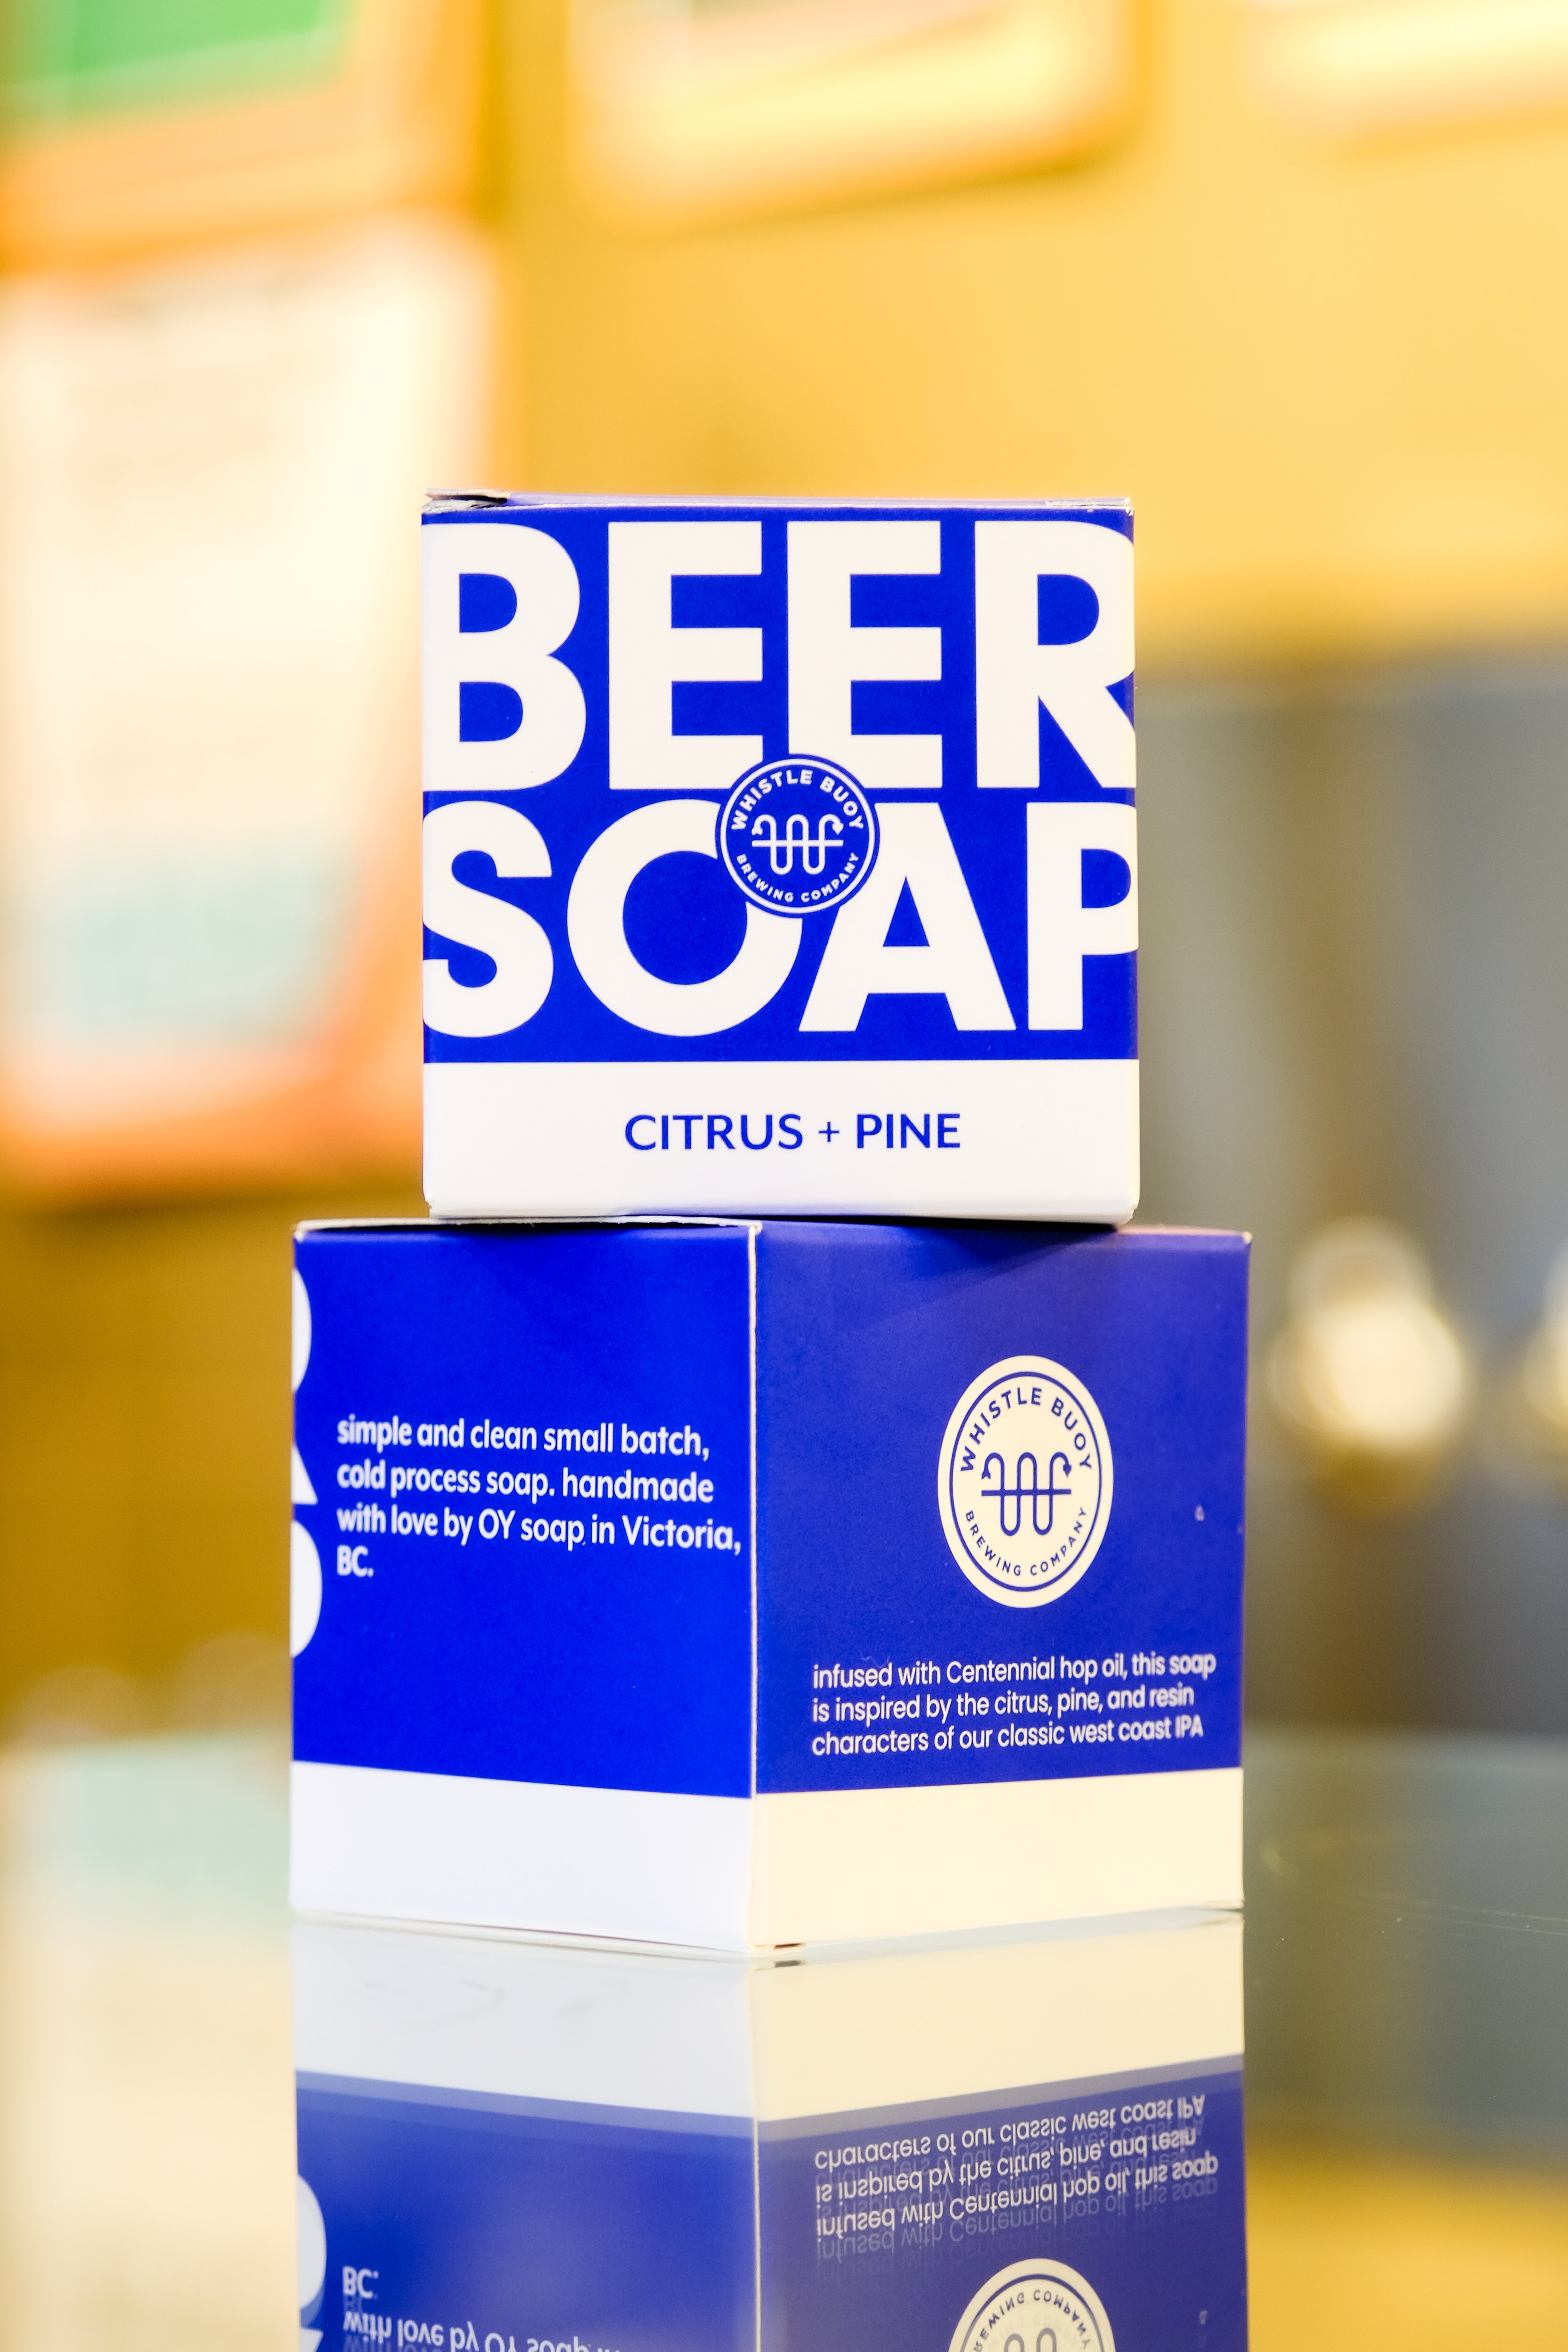 WB x OY Beer Soap